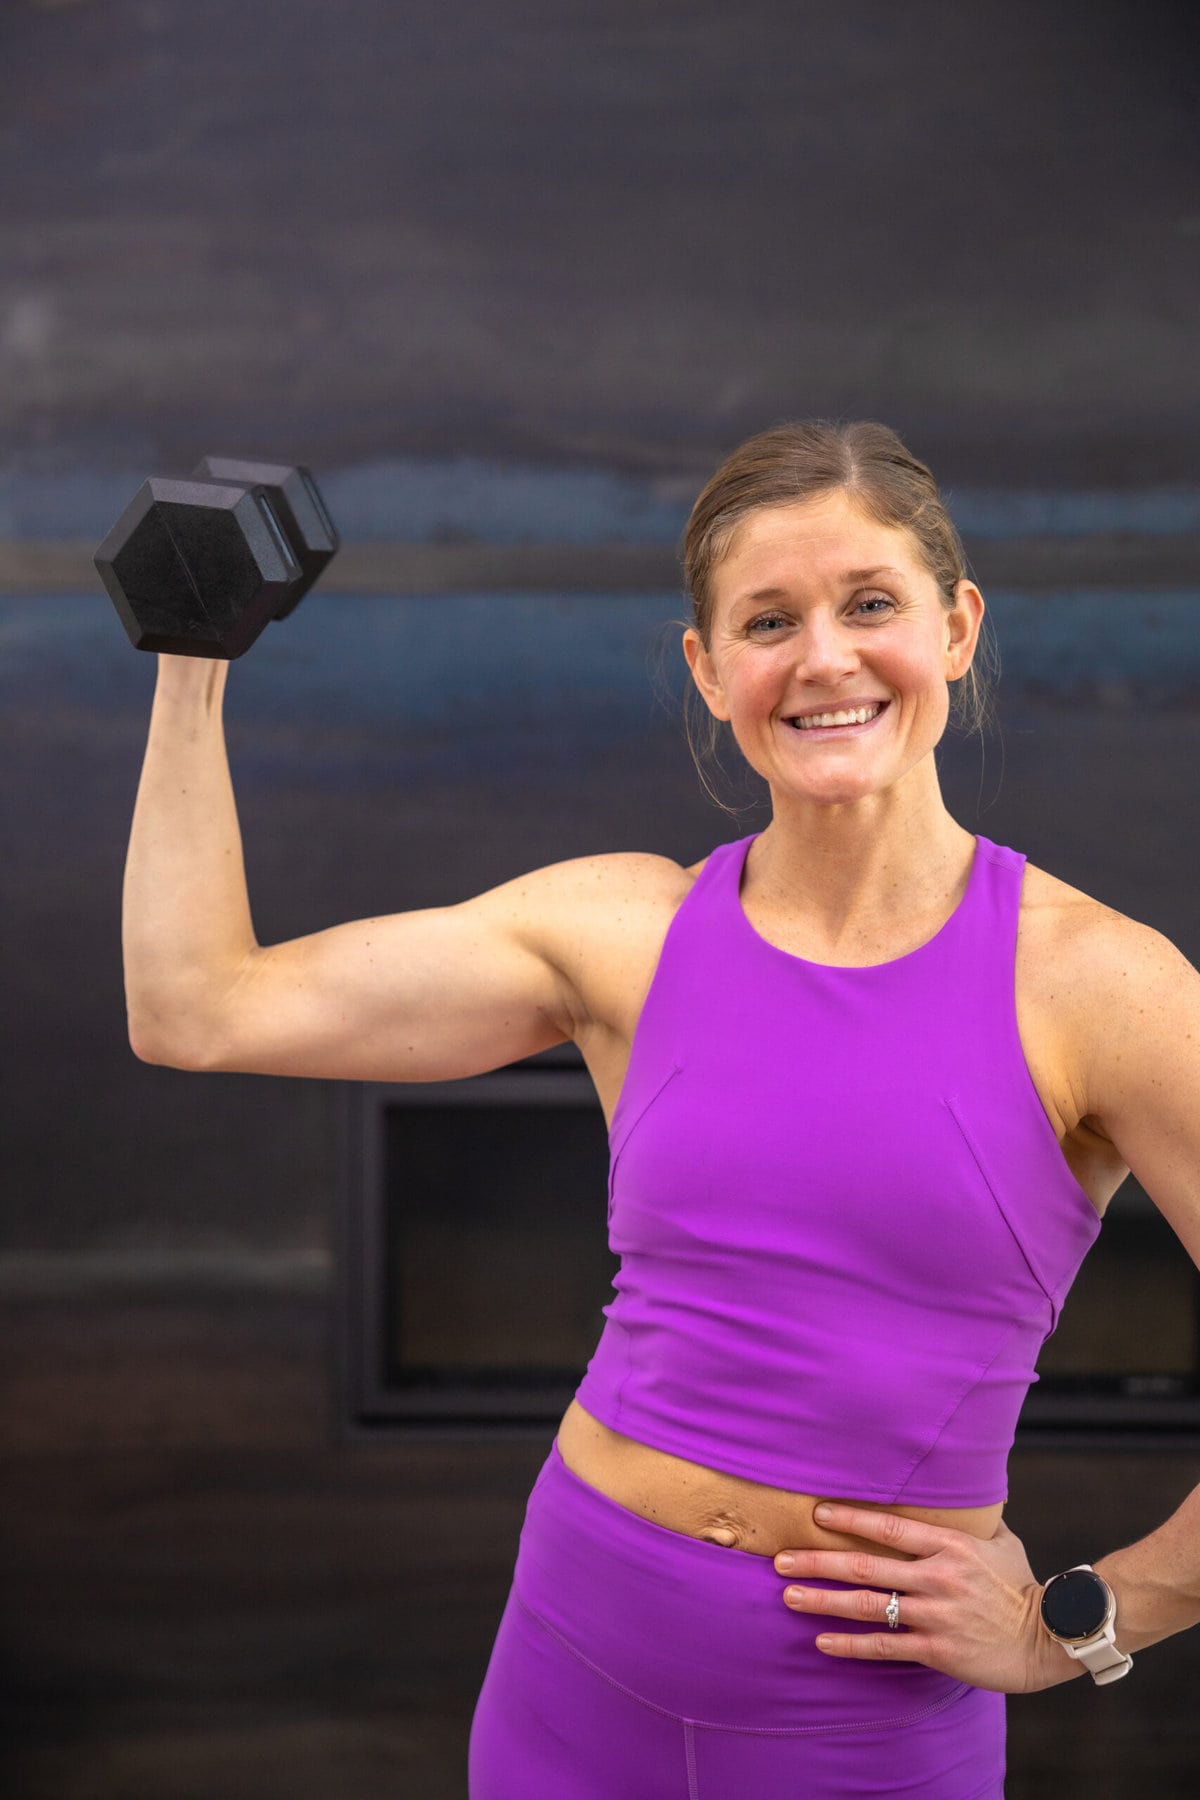 exercise for arms for women at home